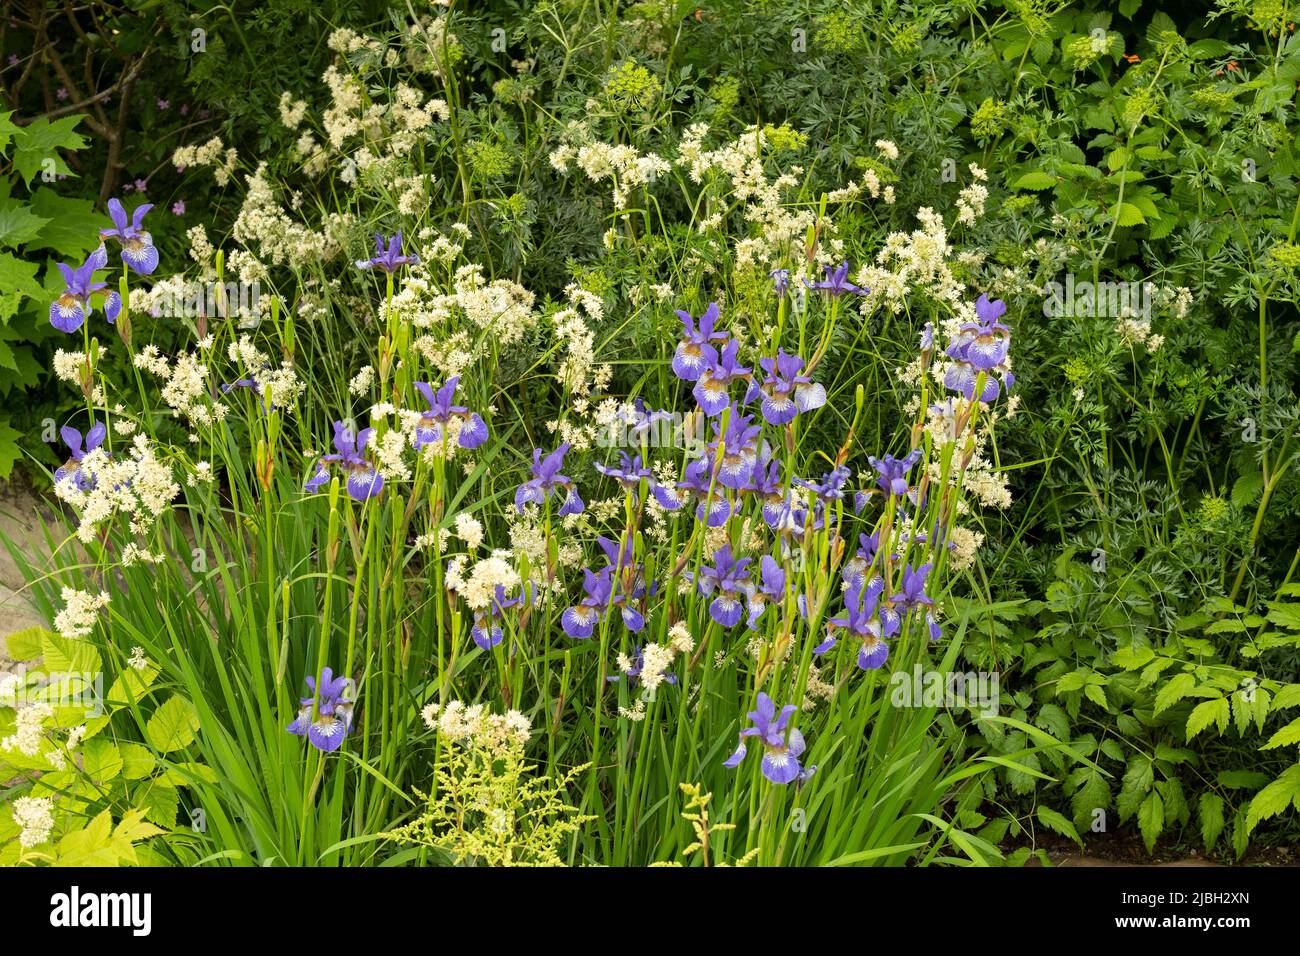 Planting in the Place 2be Securing Tomorrow Garden designed by Jamie Butterworth to promote children’s mental health.  Plants include: Iris x robusta Stock Photo